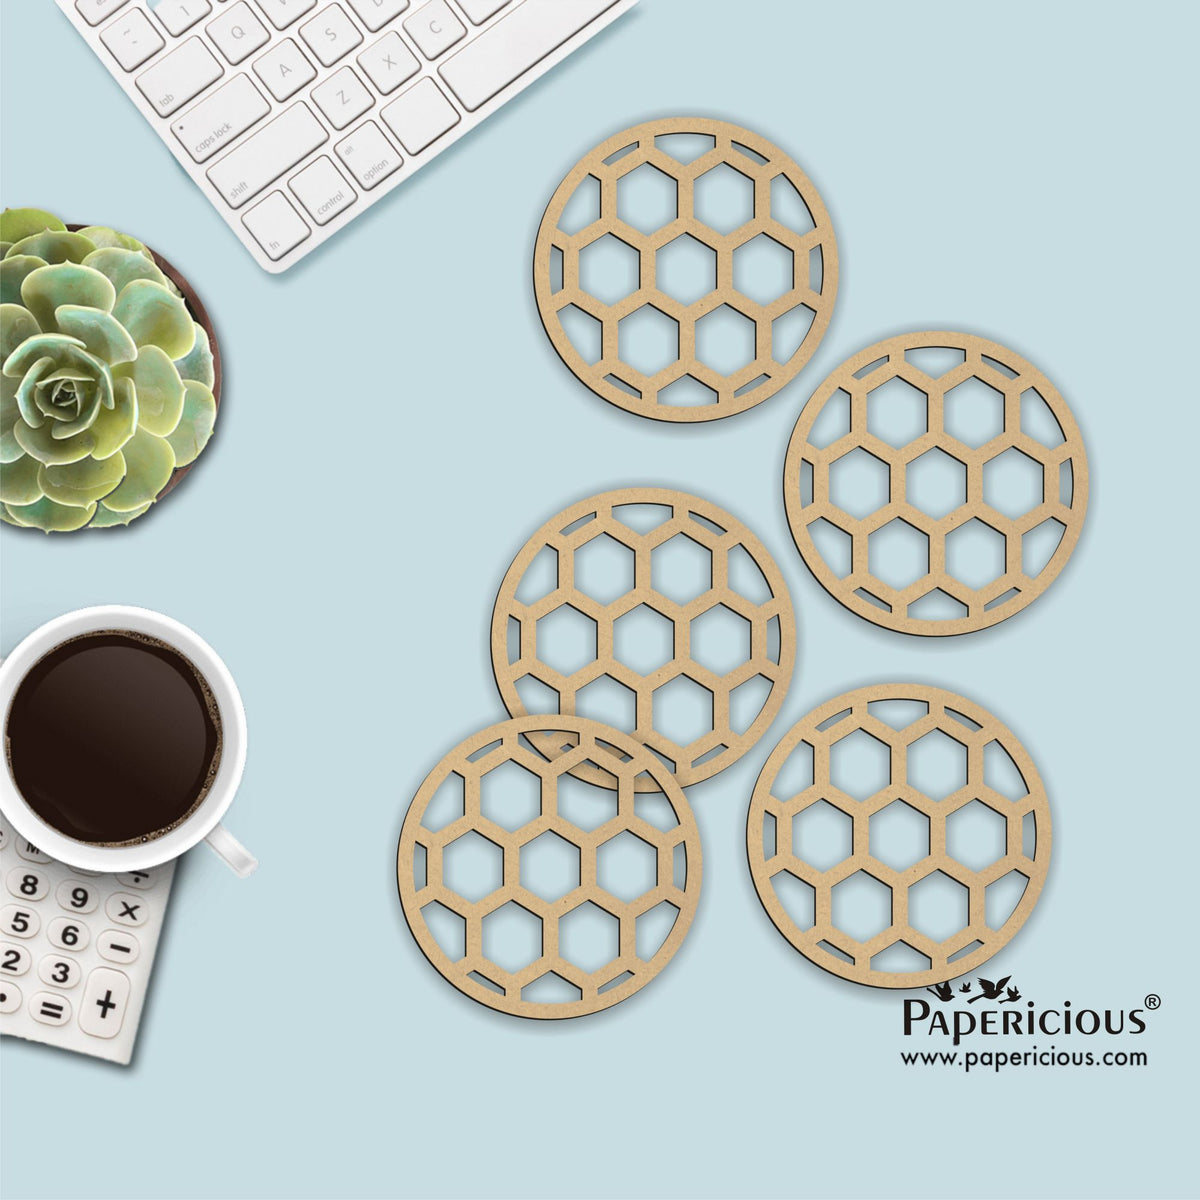 PAPERICIOUS Laser Cut Coasters - Honeycomb - 3.75 x3.75 inch